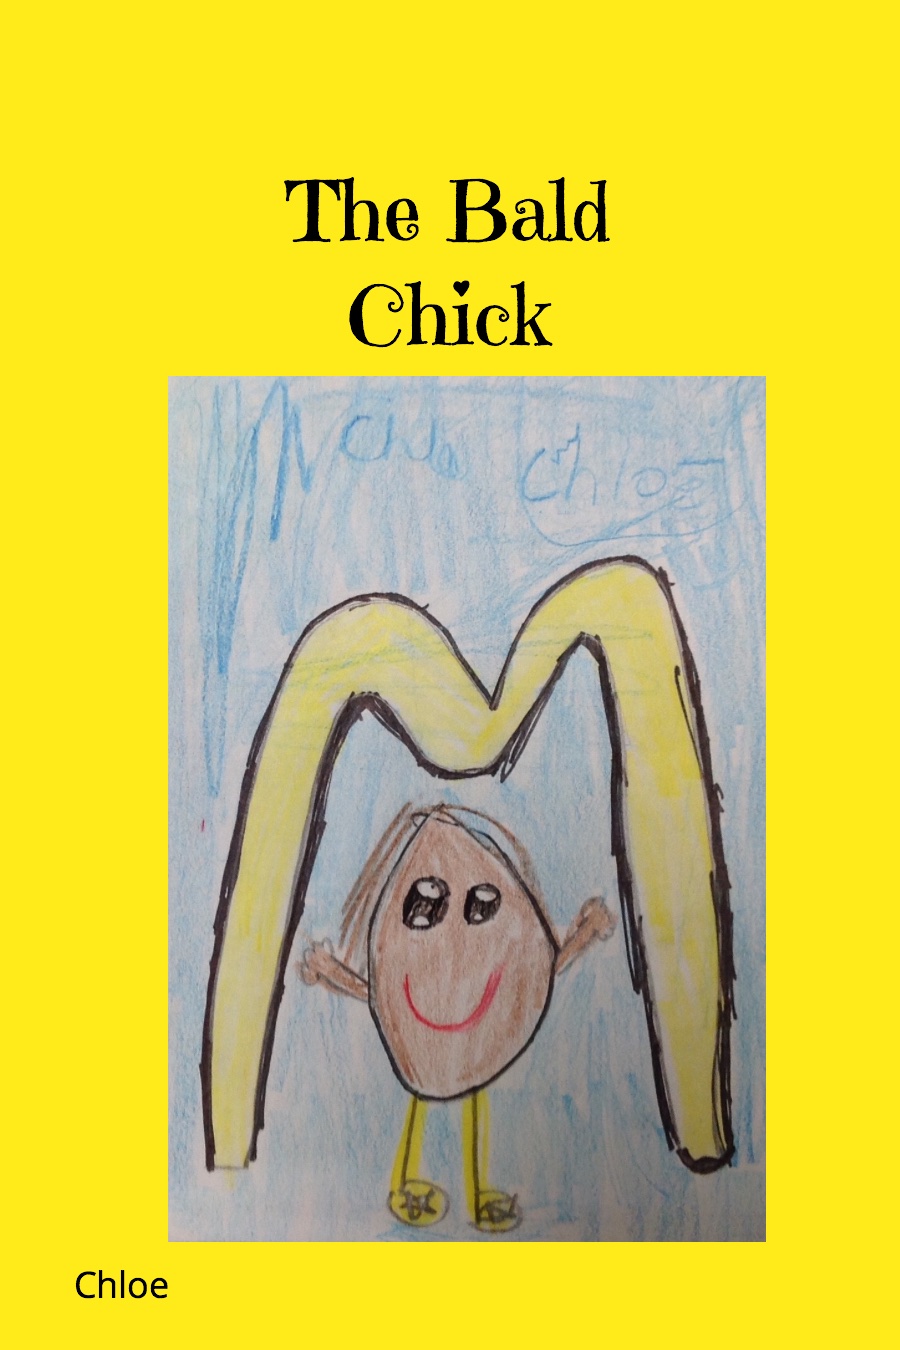 The Bald Chick by Chloe P